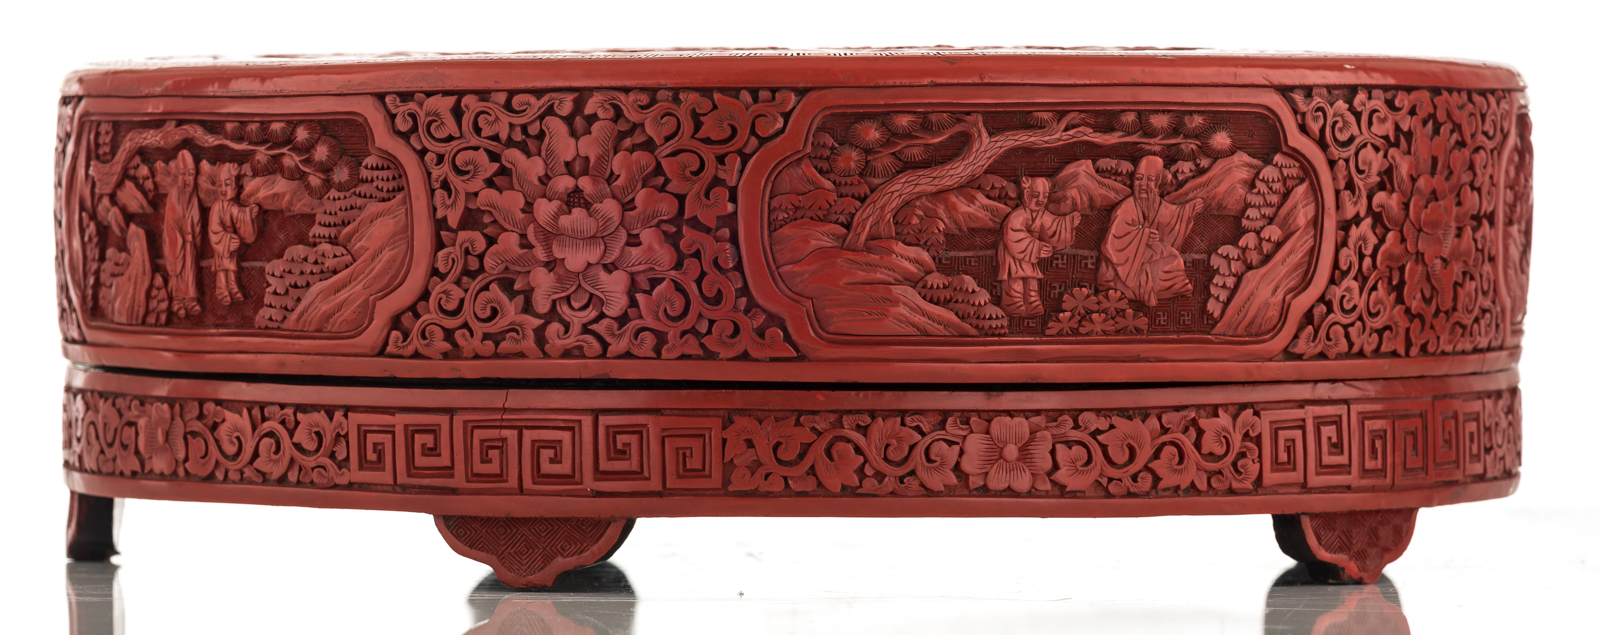 A Chinese Peking cinnabar lacquered sweetmeat box and cover, H 11,5 - ø 32,5 cm - Image 3 of 8